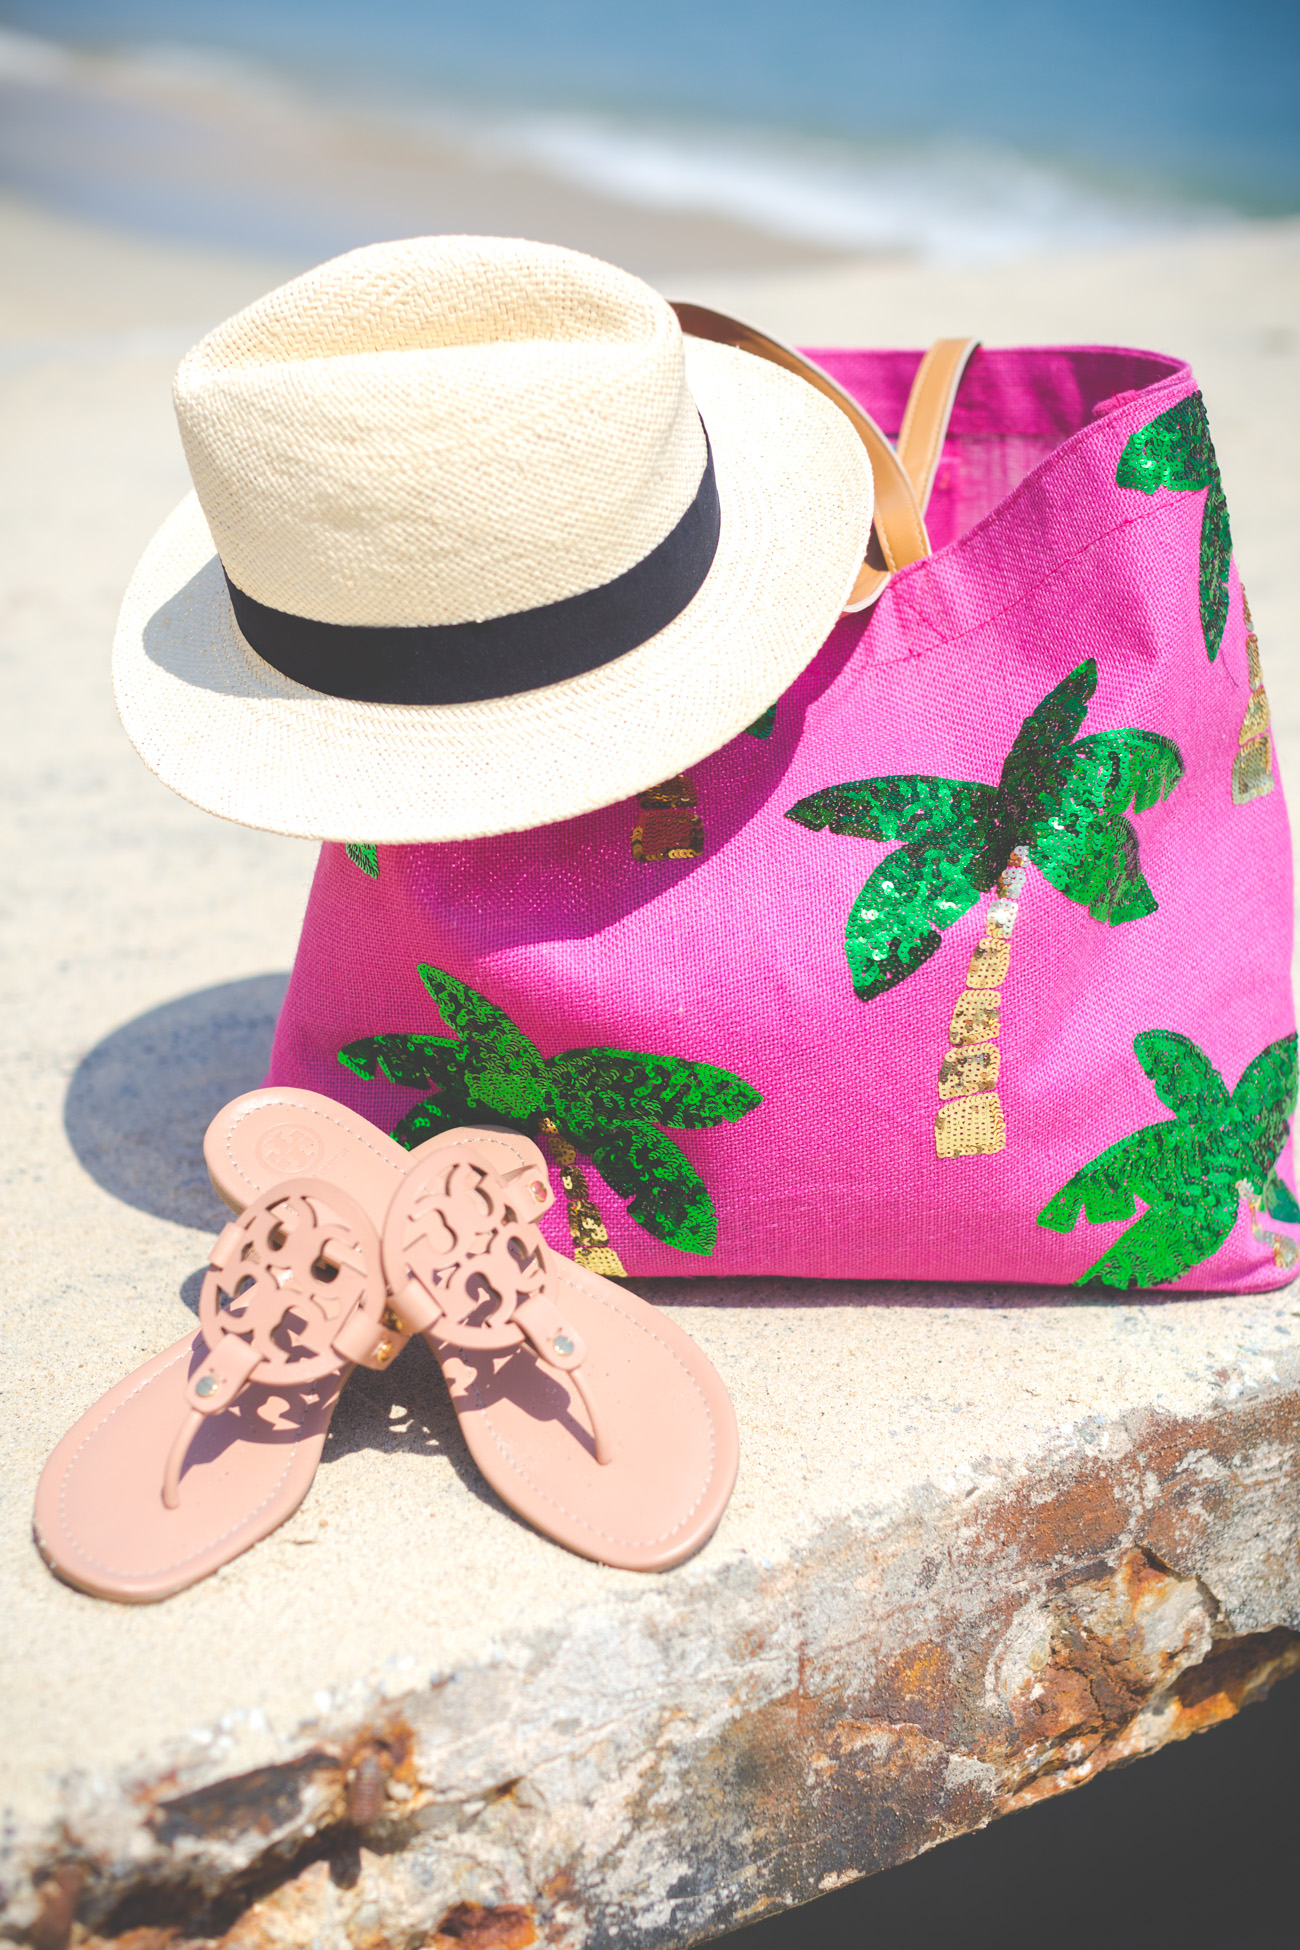 palm print tote, sequin palm print tote, tory burch miller sandals, j.crew panama hat, puerto vallarta mexico, where to stay in puerto vallarta, best hotels in mexico, best hotels in puerto vallarta, marriott casamagna puerto vallarta, marriott puerto vallarta, kentucky travel blogger, a southern drawl travel // grace wainwright a southern drawl